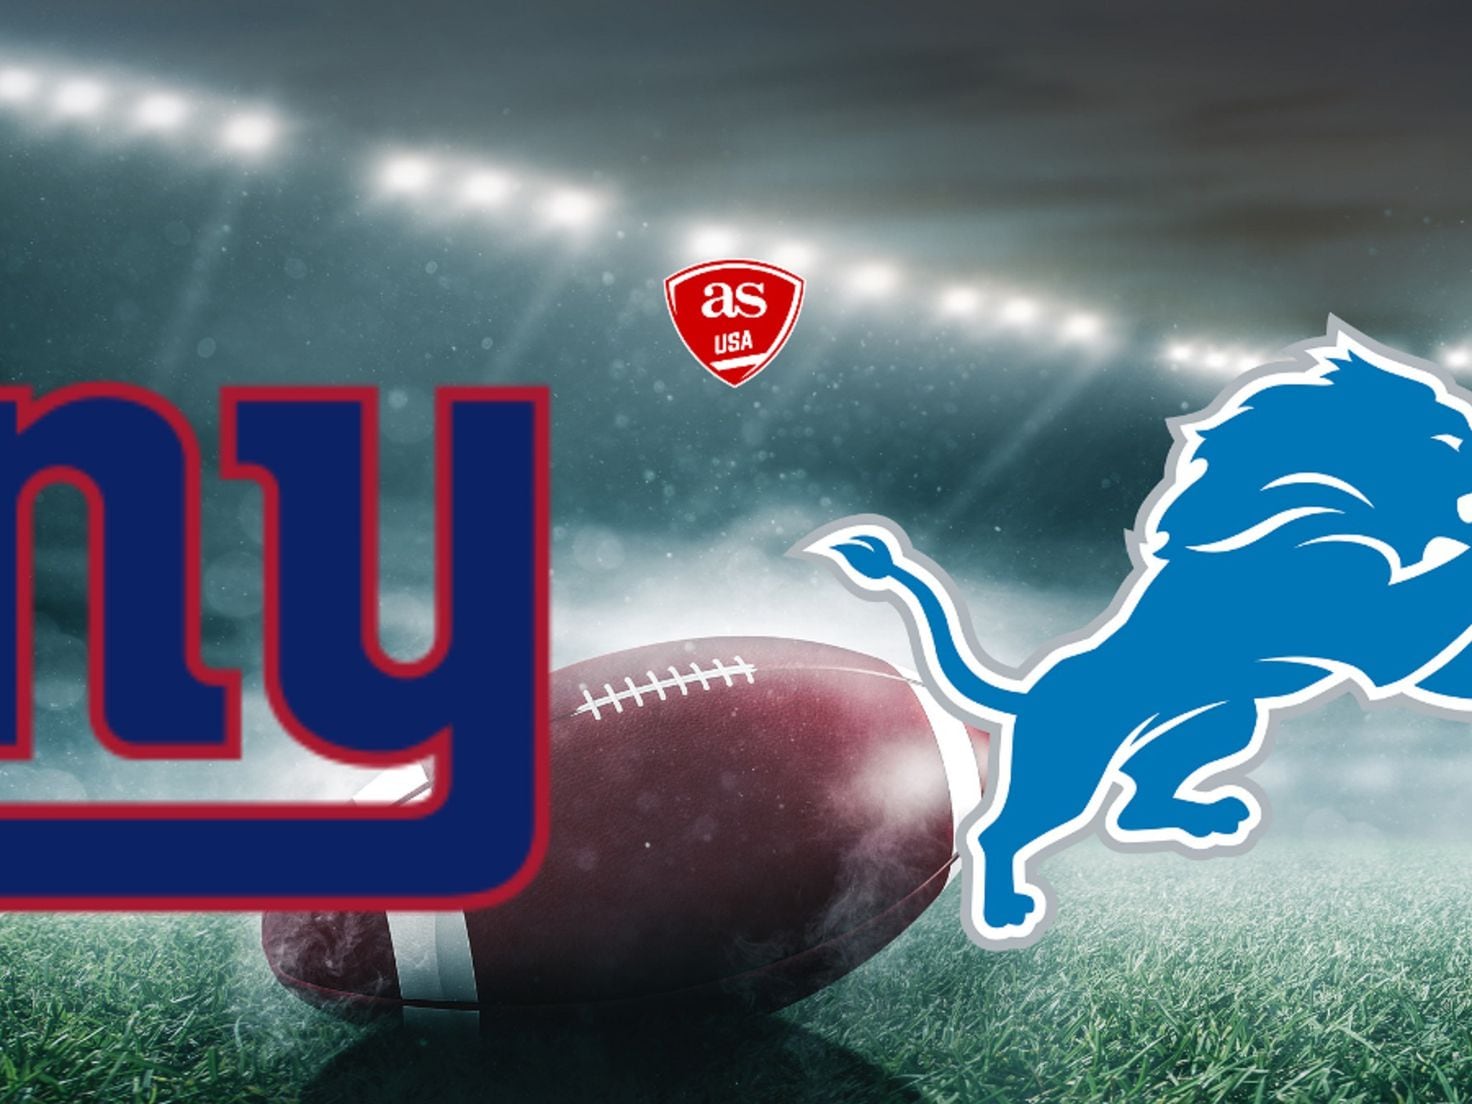 New York Giants vs Detroit Lions: times, how to watch on TV, stream online